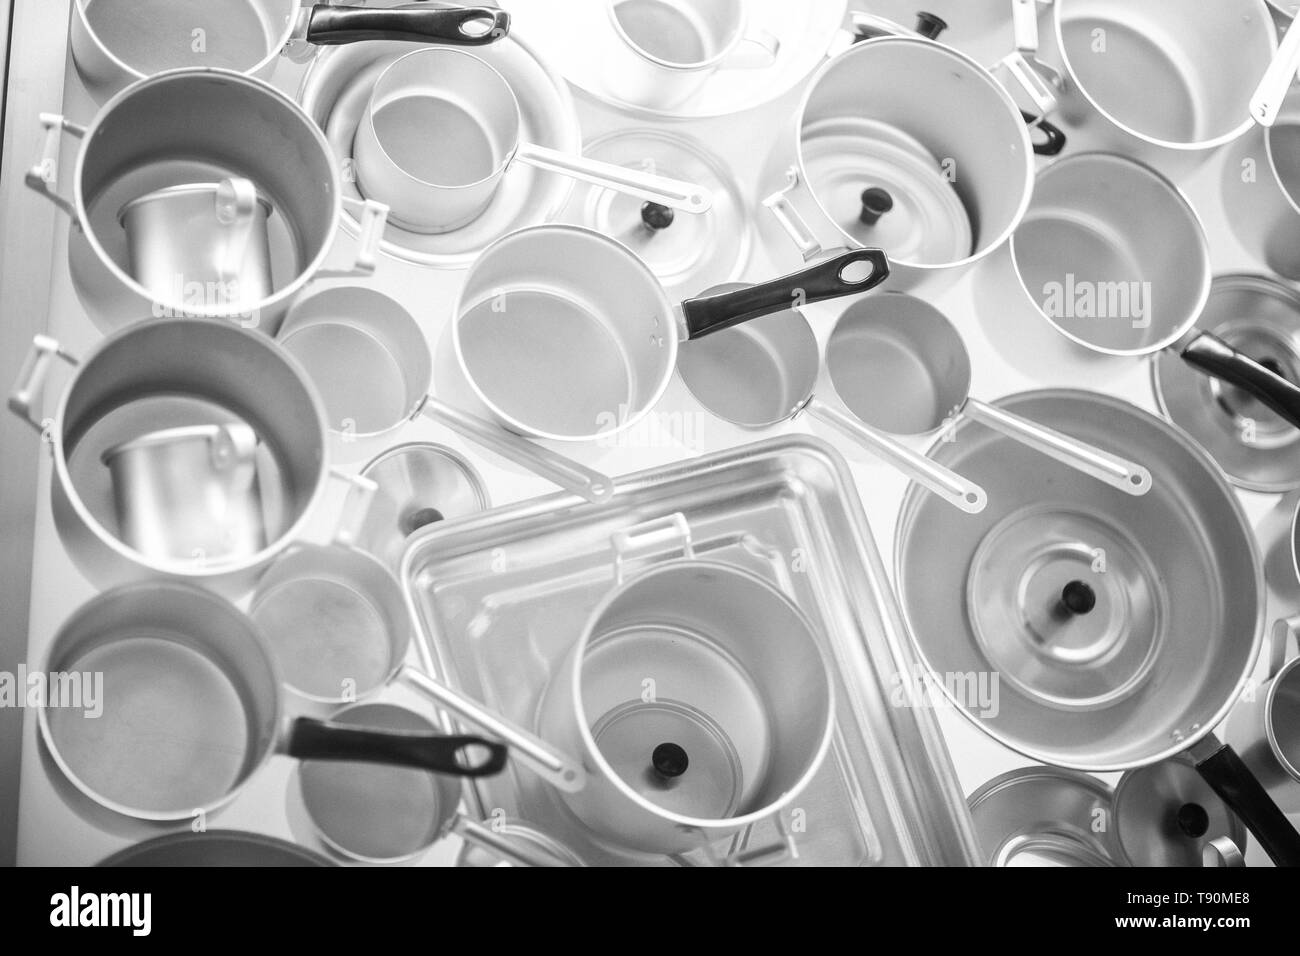 Black and white photo of of pots and pans Stock Photo